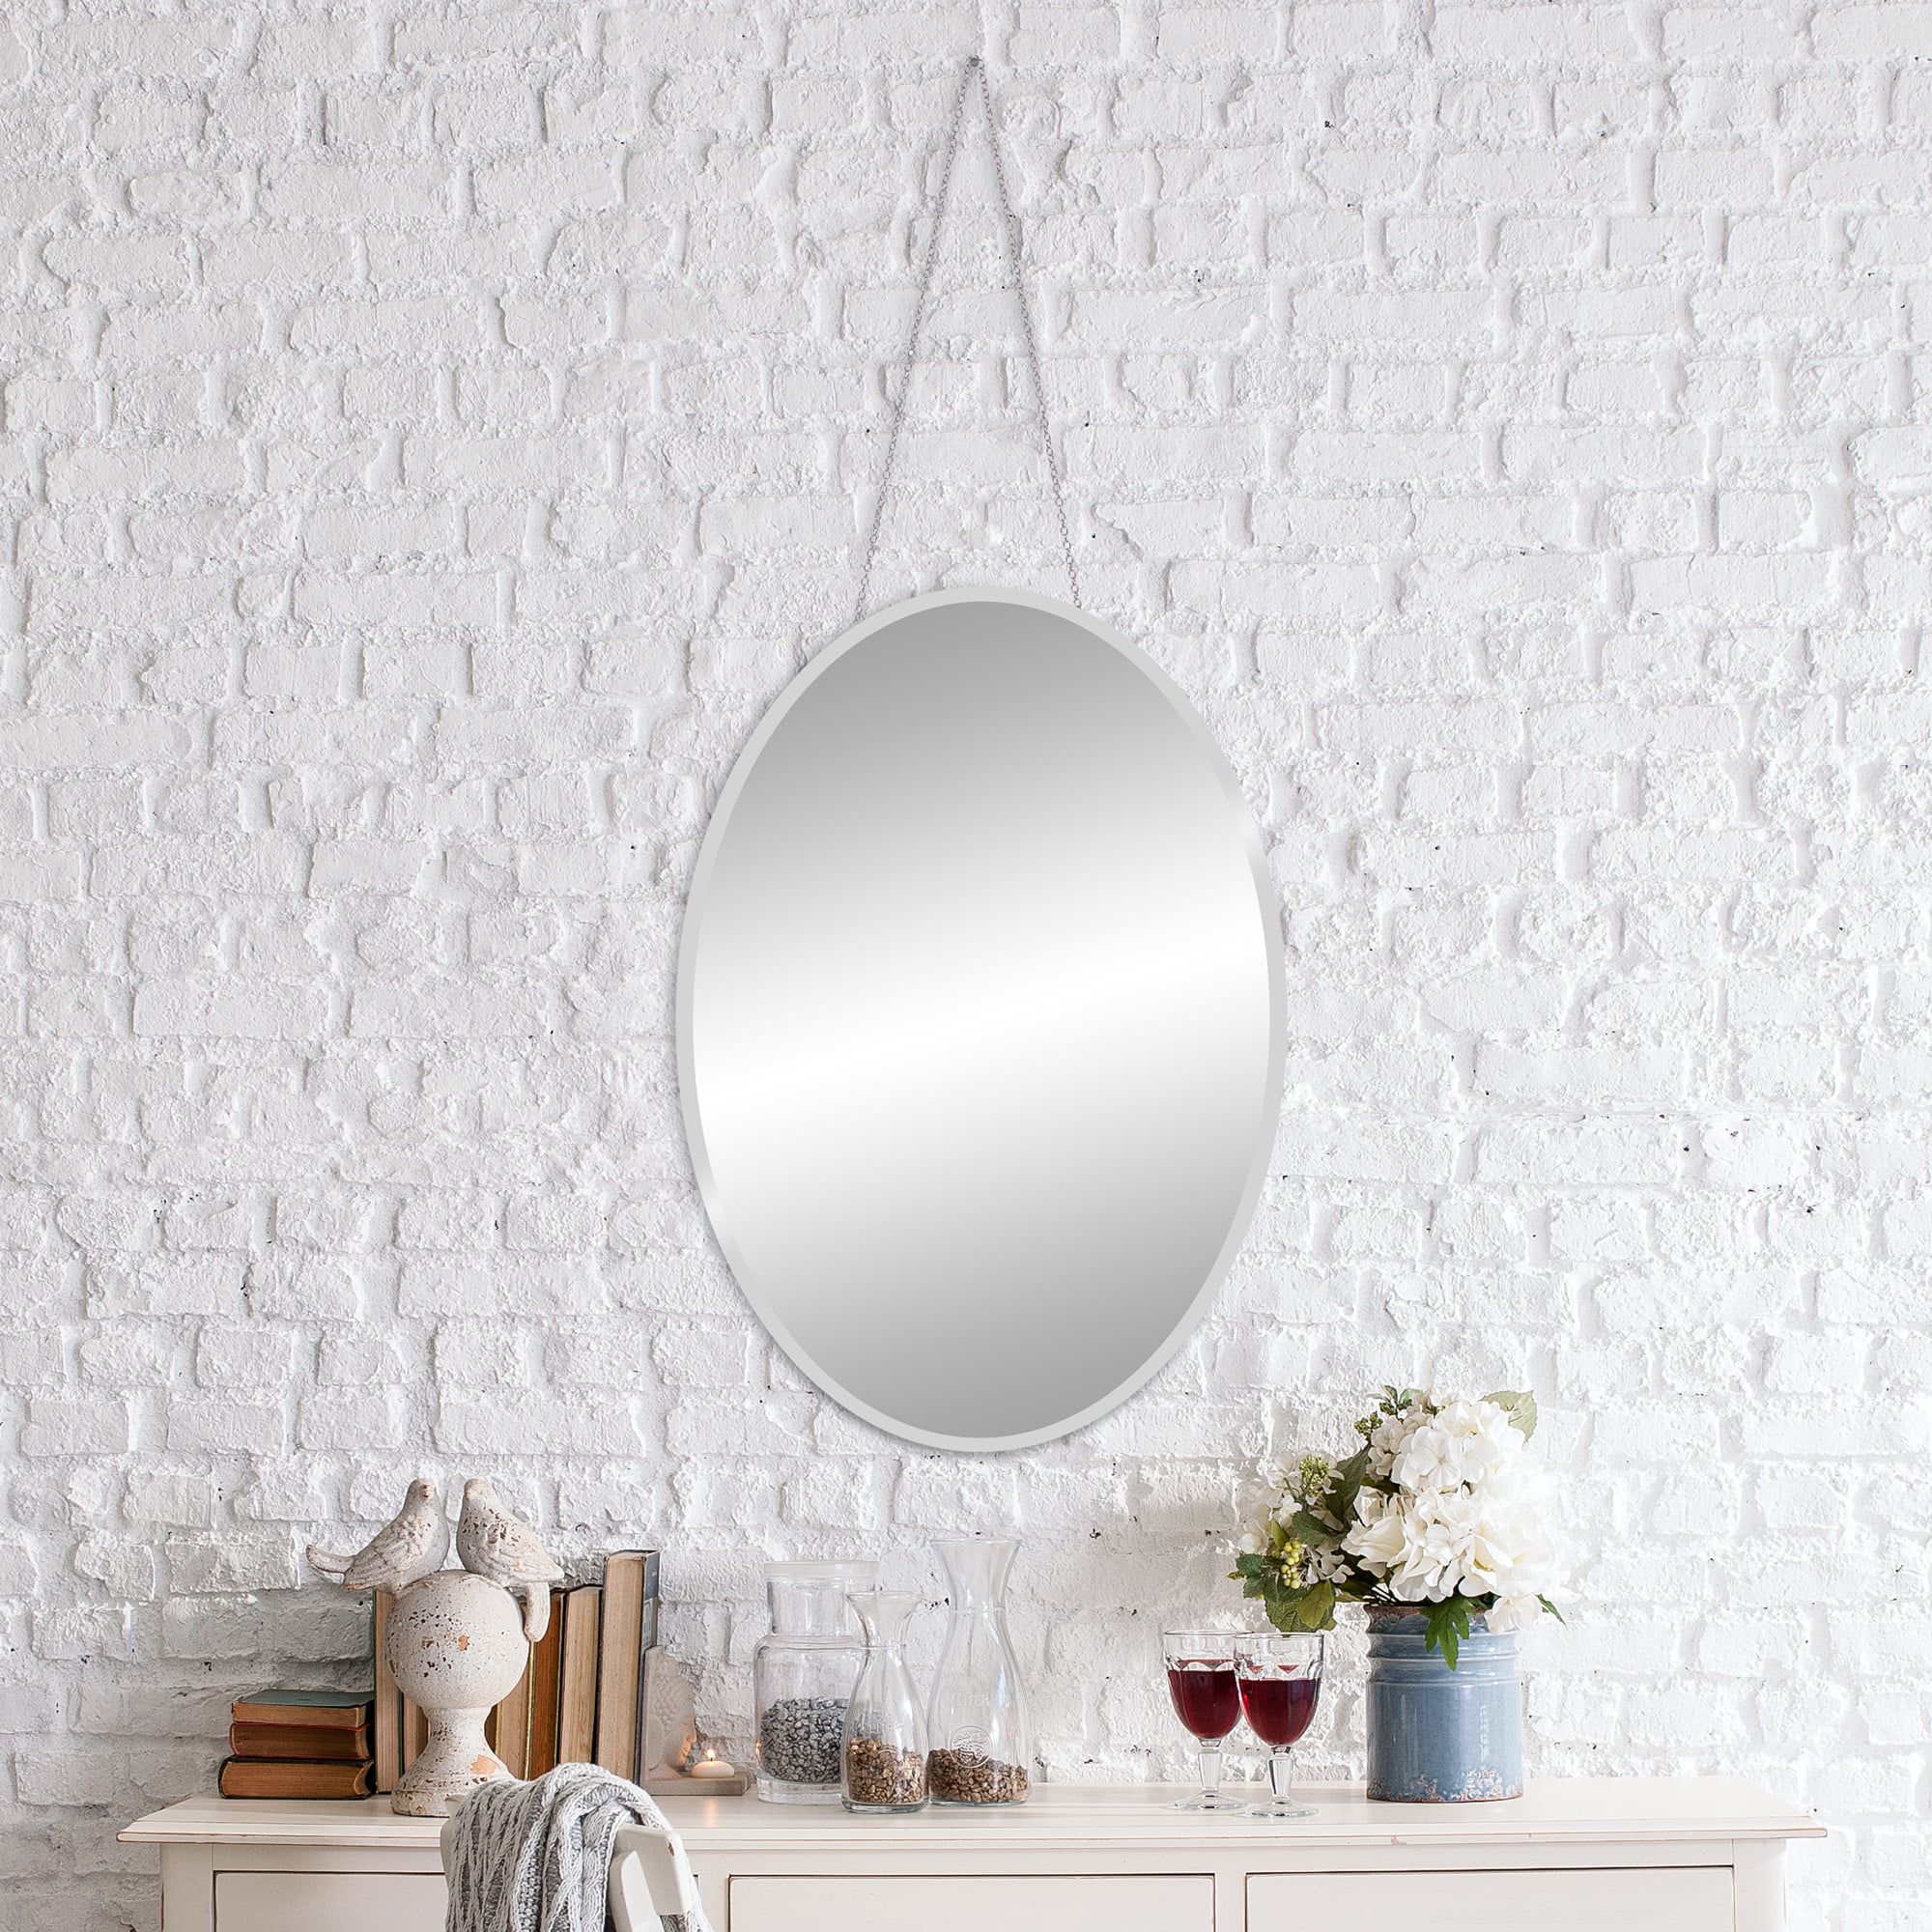 Patton Wall Decor 17x24 Frameless Beveled Oval Mirror With Hanging Inside Thornbury Oval Bevel Frameless Wall Mirrors (View 4 of 15)